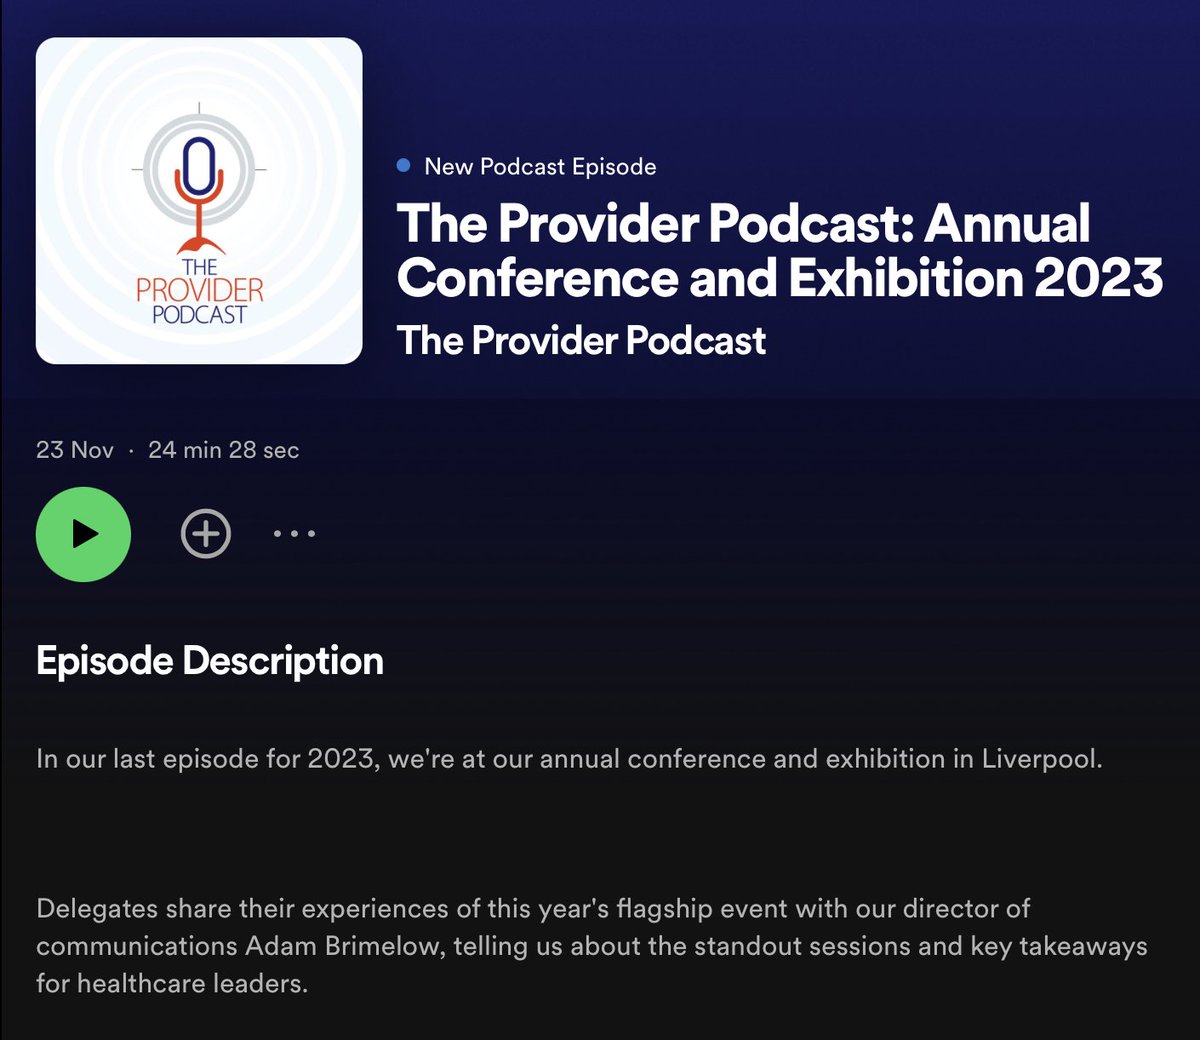 #TheProviderPodcast  'Annual Conference and Exhibition 2023 in Liverpool'  Delegates share their experiences of this year's flagship event with  @adambrimelow  talking about the standout sessions and key takeaways for healthcare leaders.🔊 24 minutes  🎧 Listen on Spotify:…